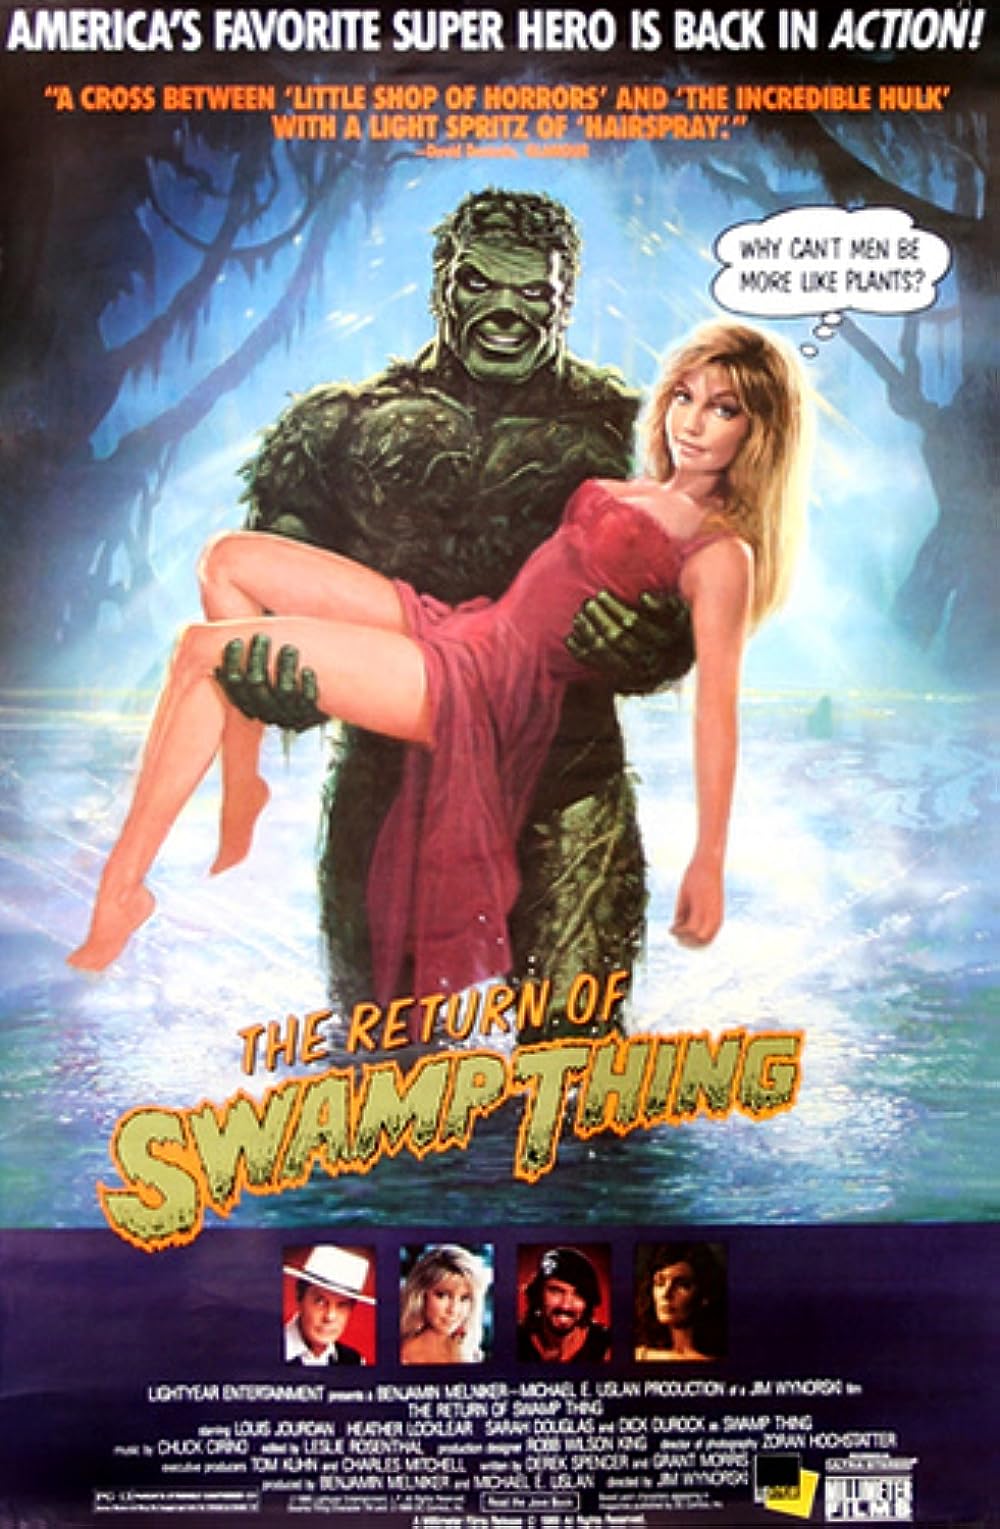 The Return of Swamp Thing- DC comics movies in order